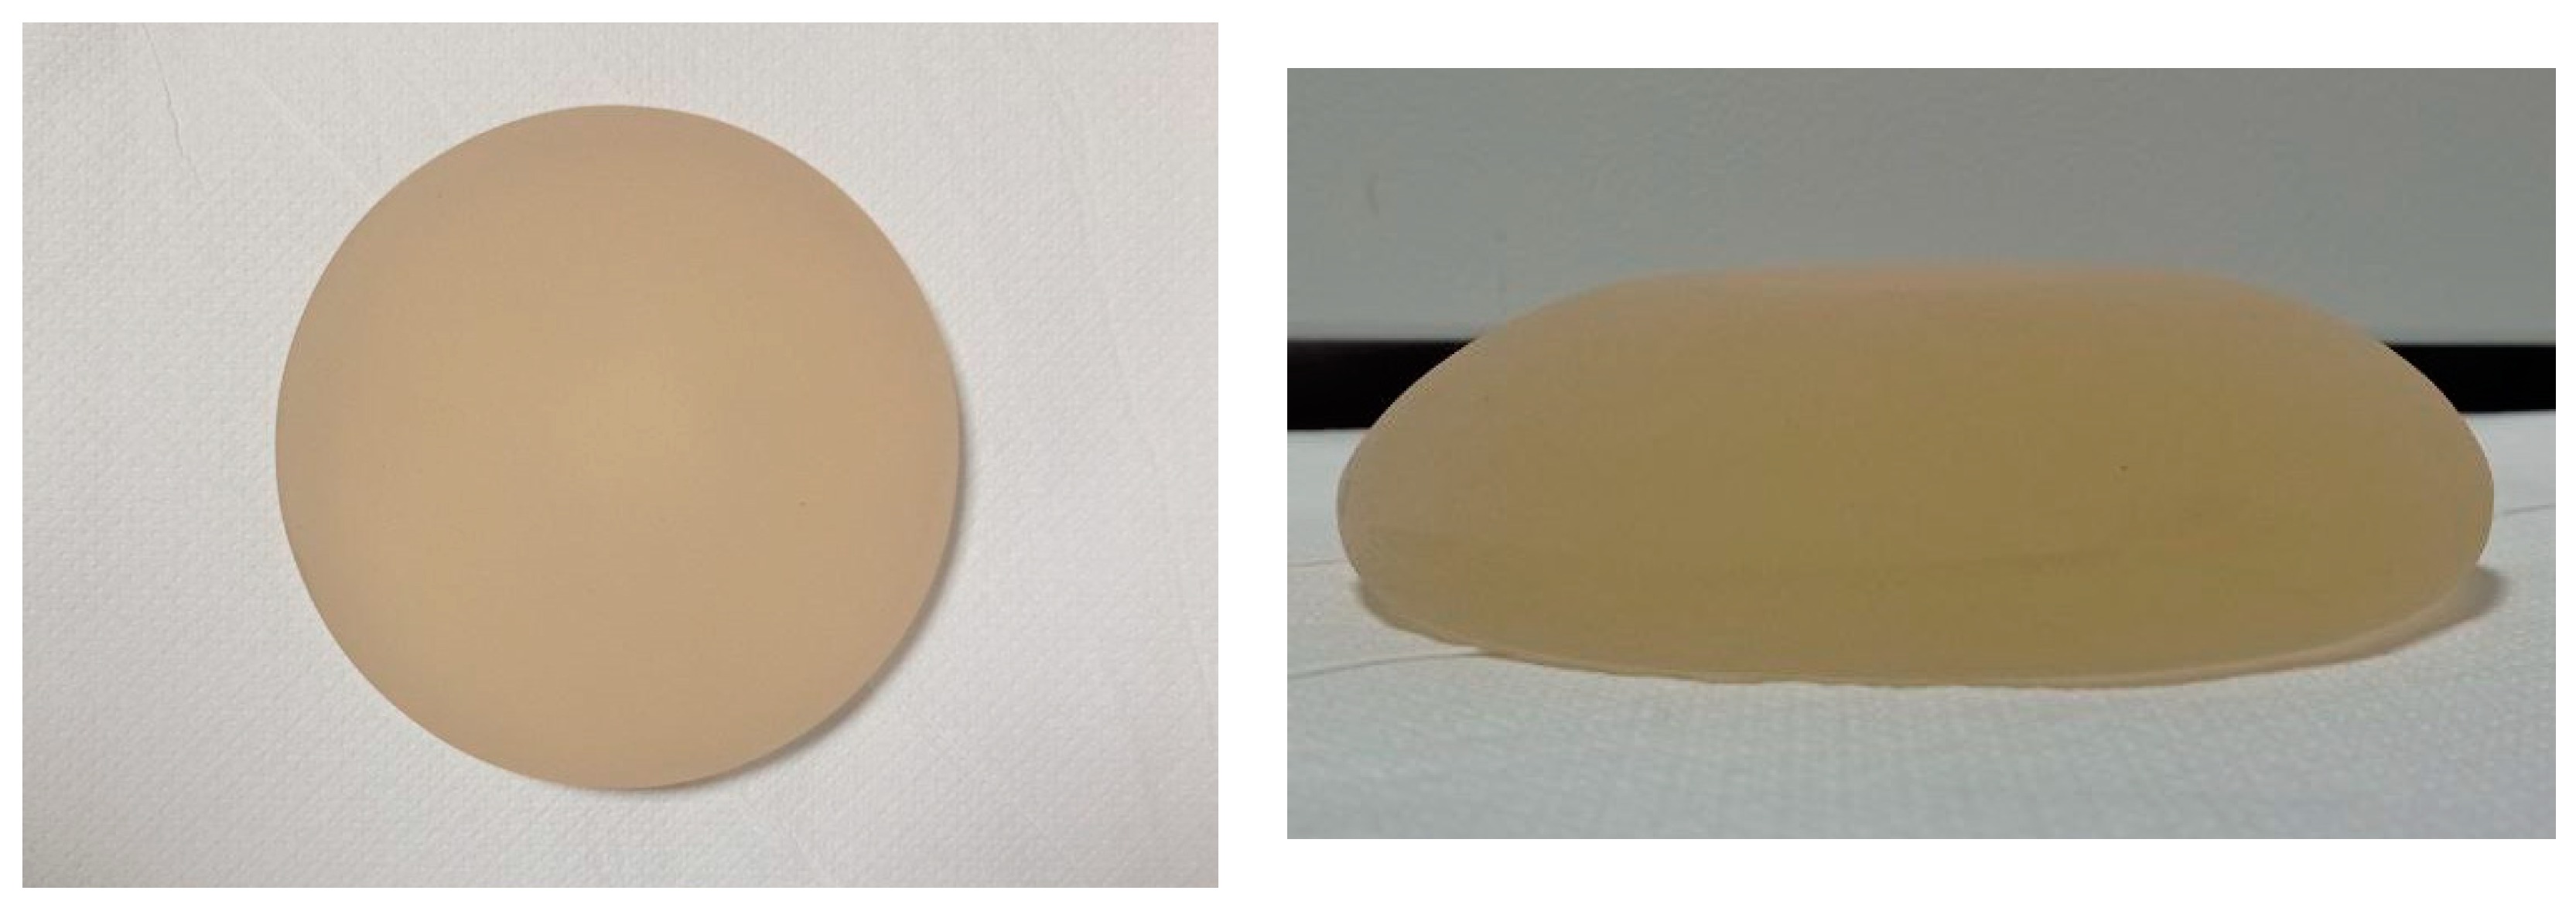 The arguments for polyurethane covered breast implants in cosmetic